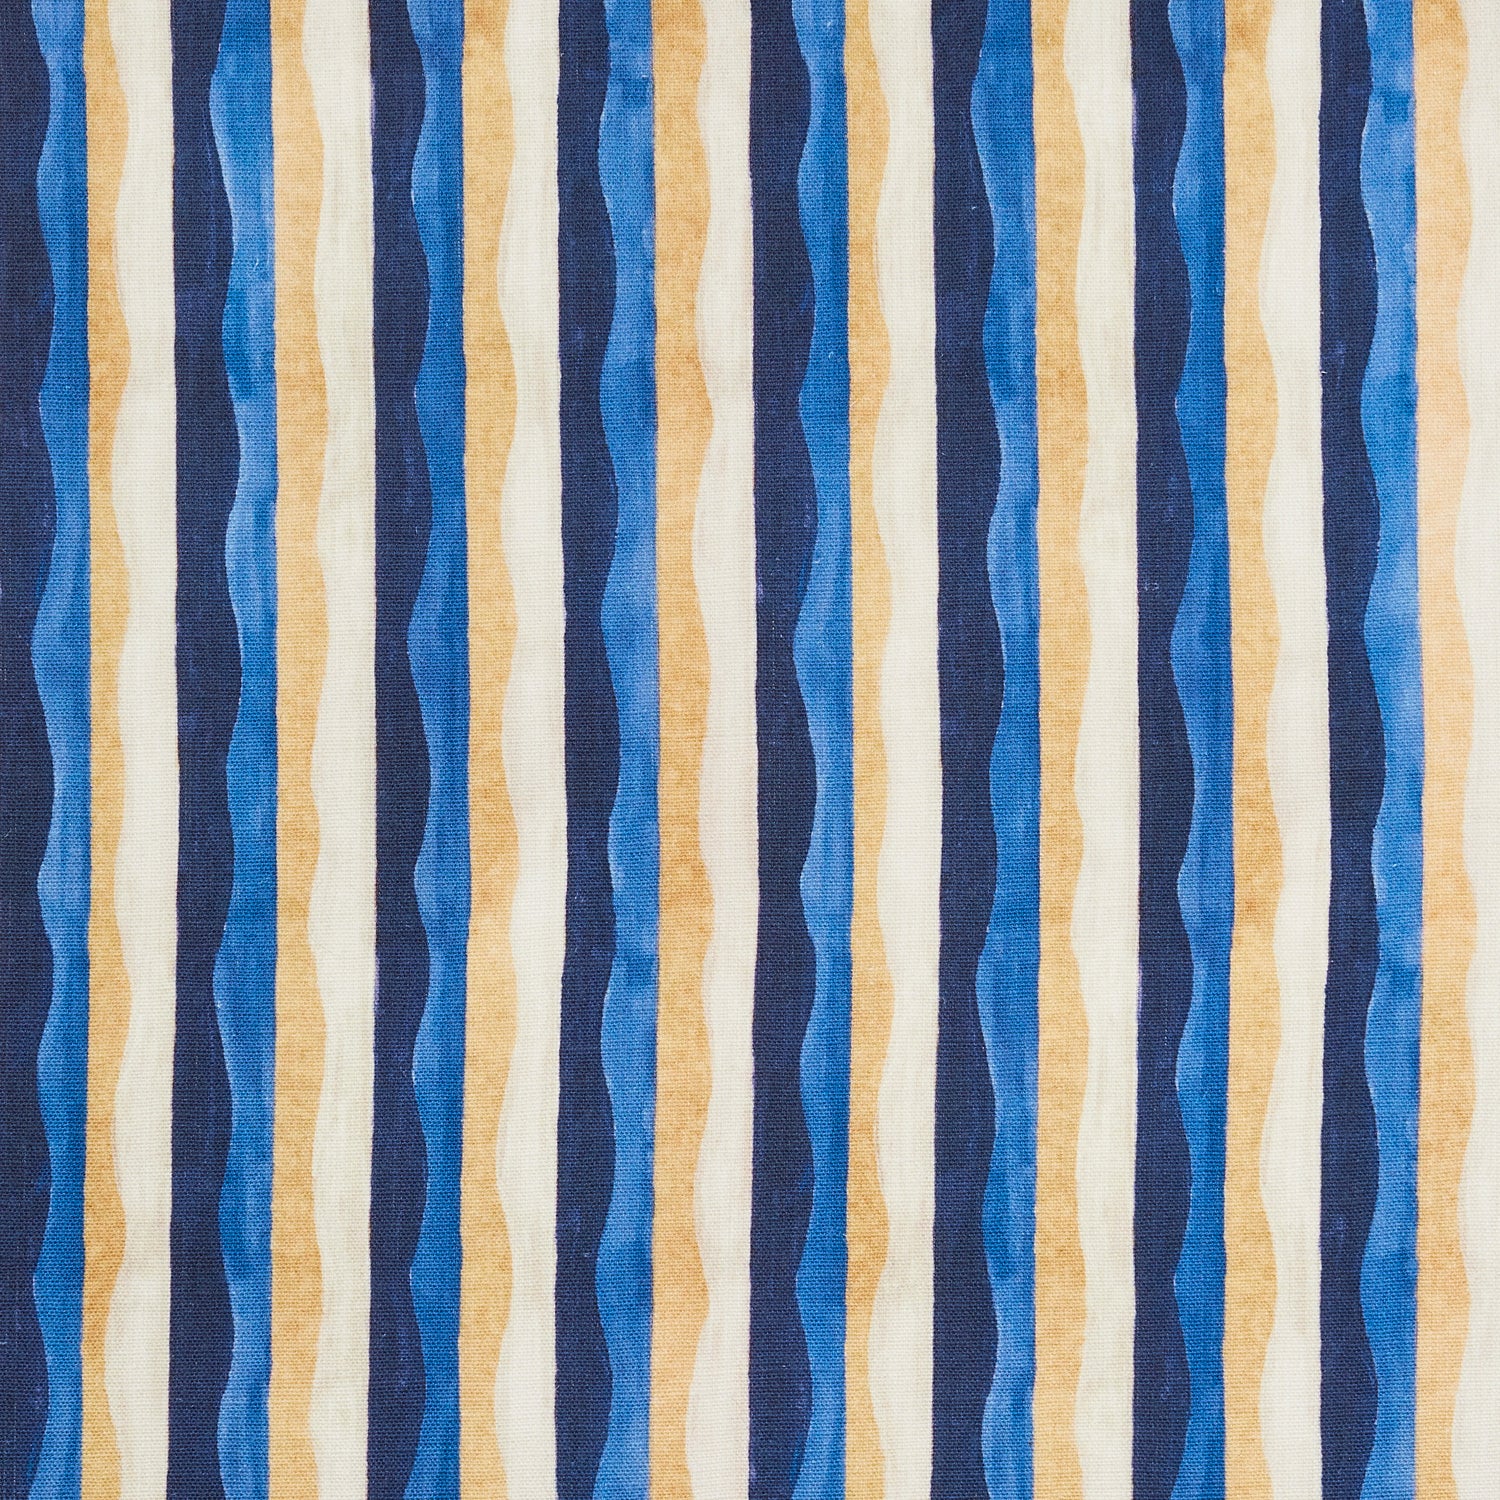 Woven fabric swatch in a curvy hand-painted stripe pattern in blue, gold, white and navy.